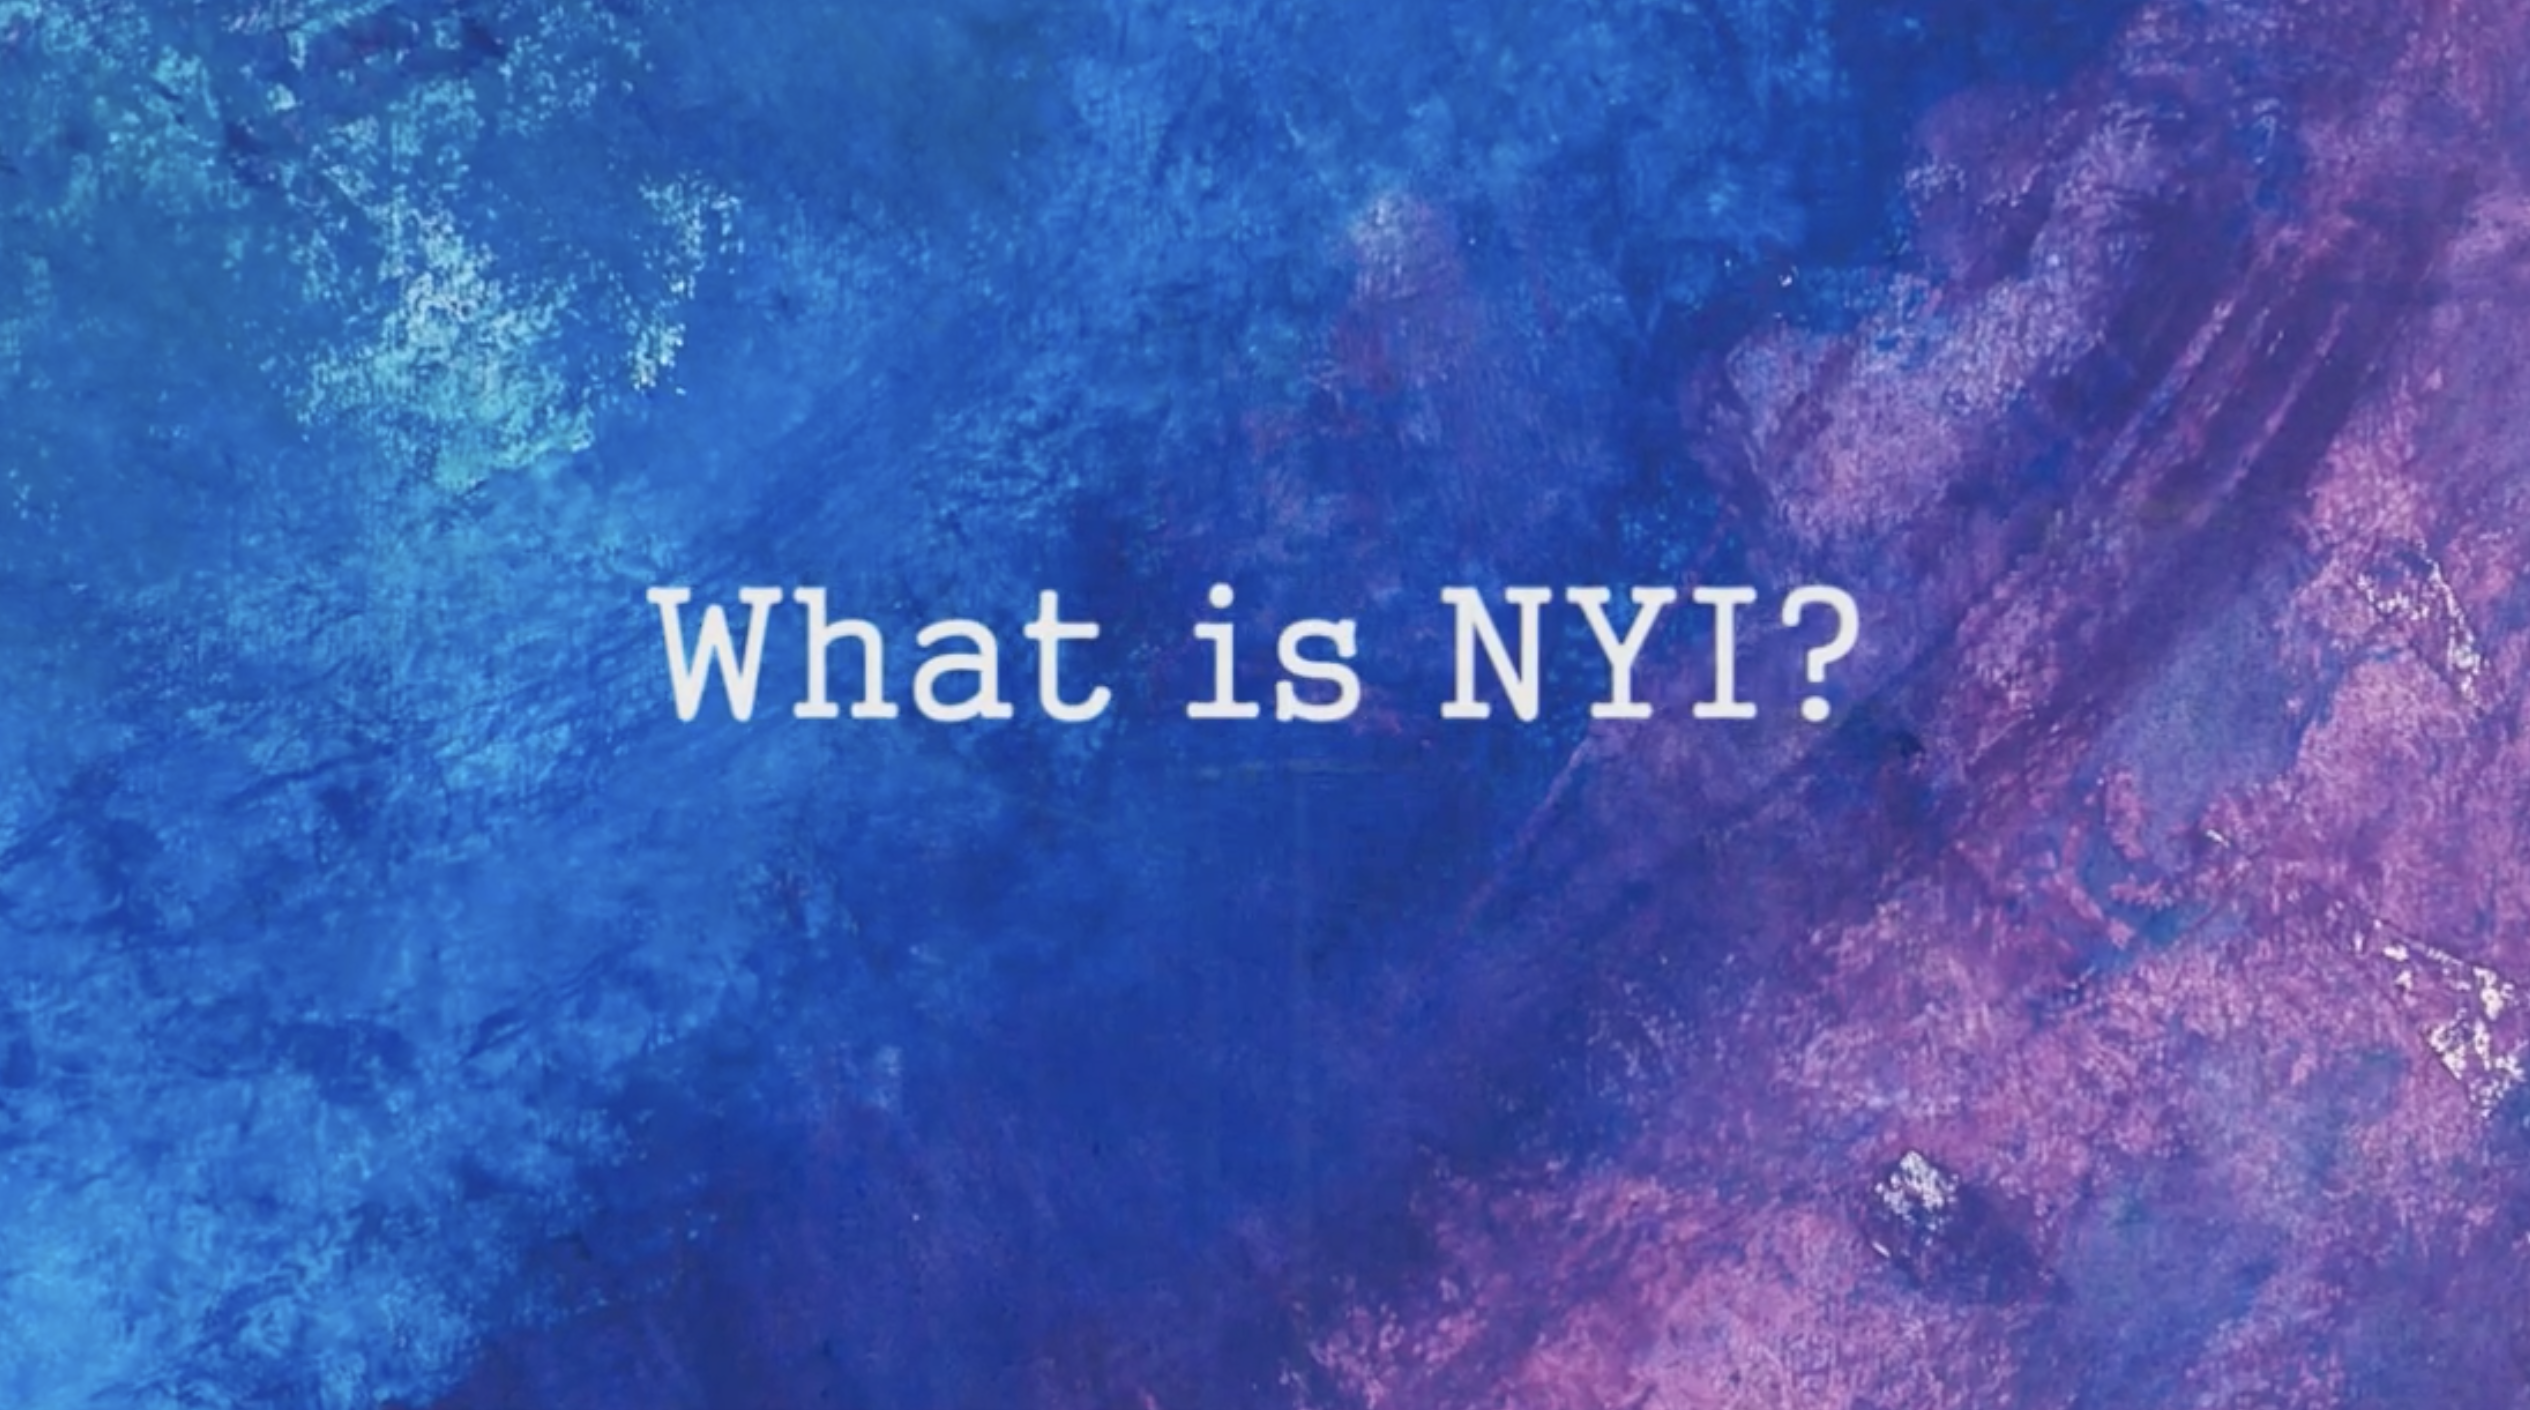 What is NYI?